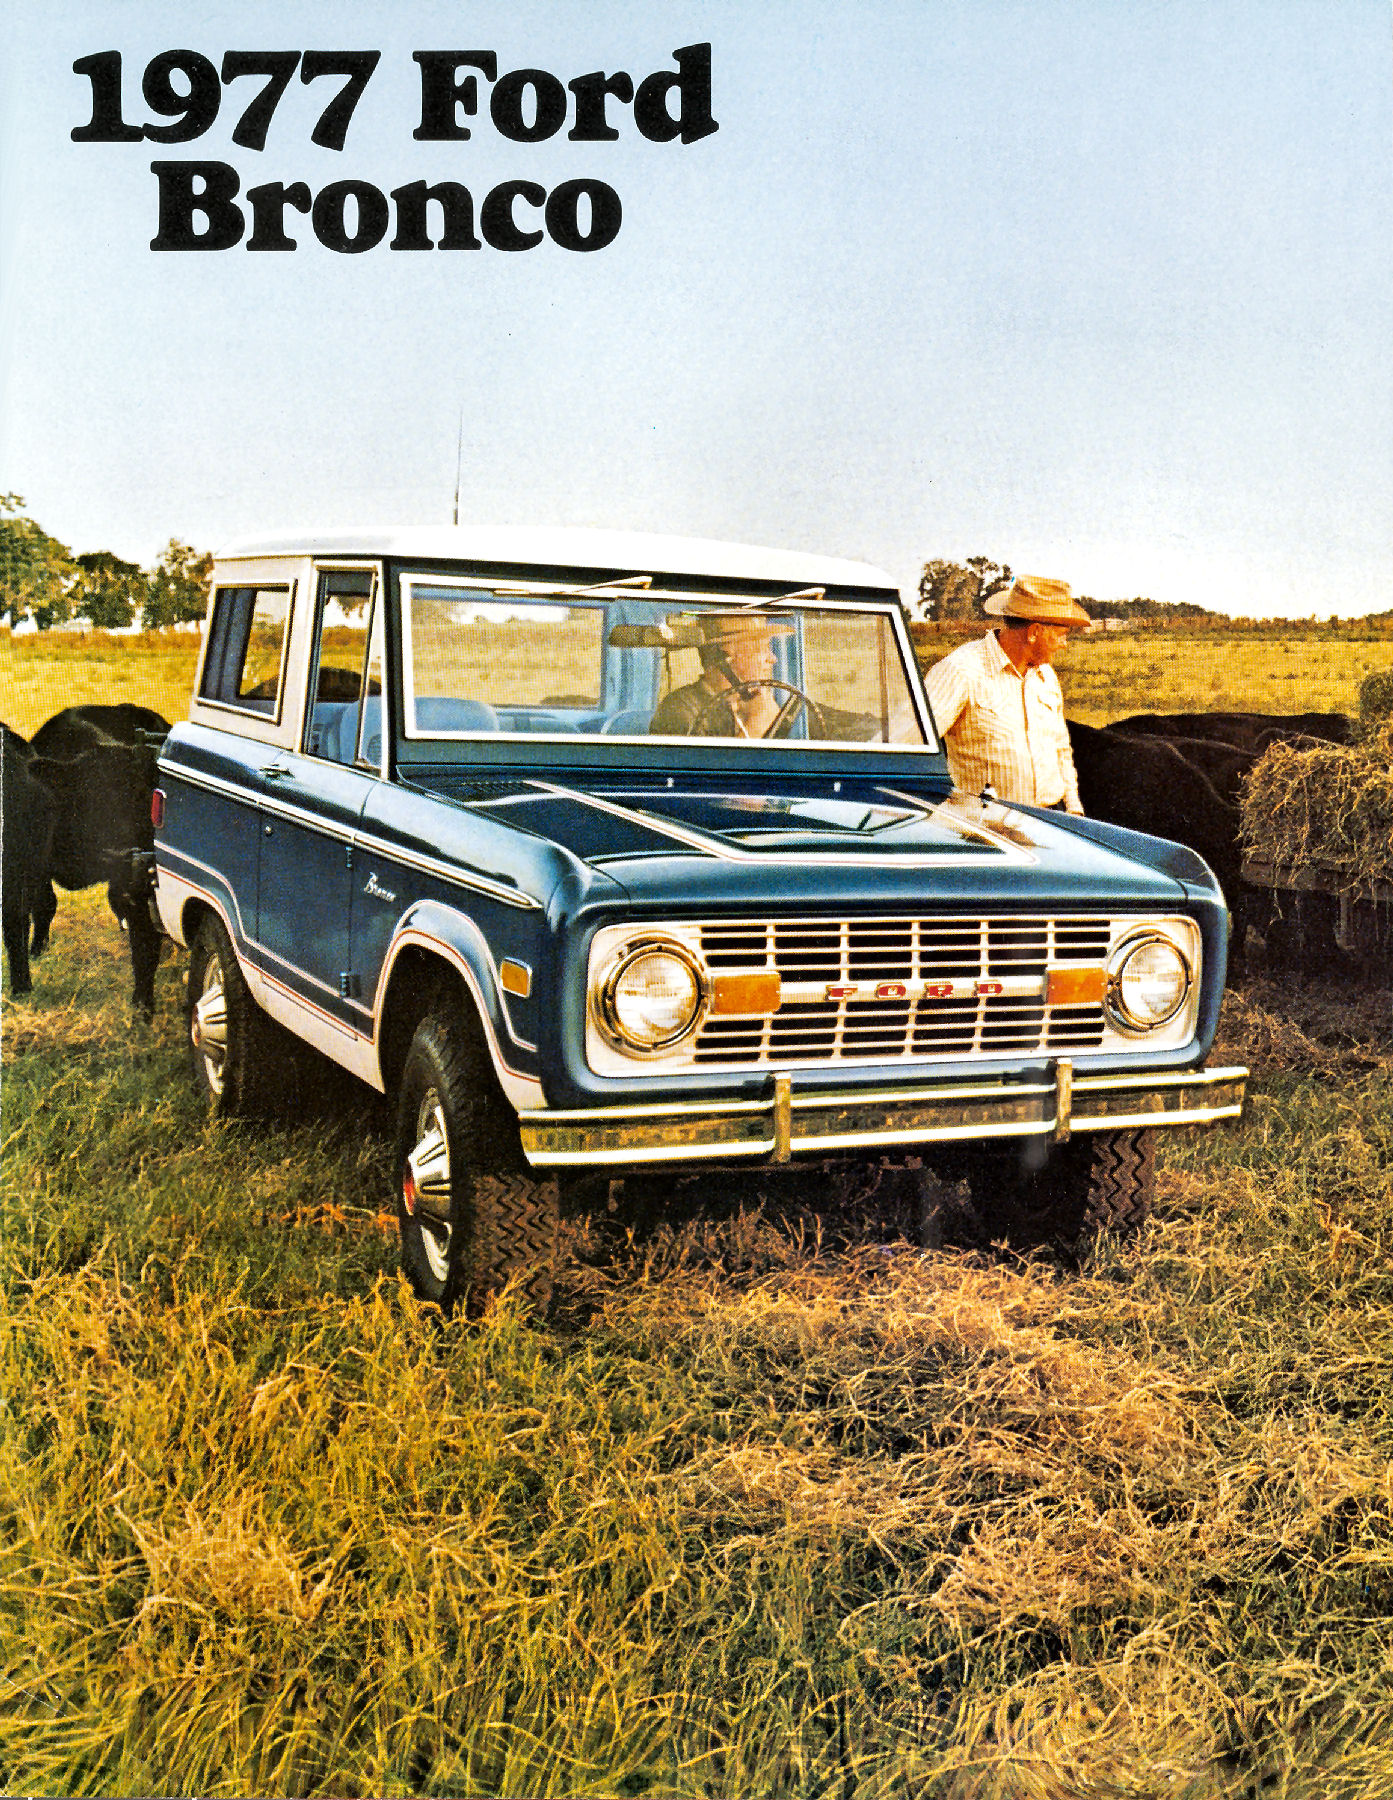 1977 Ford Bronco-01